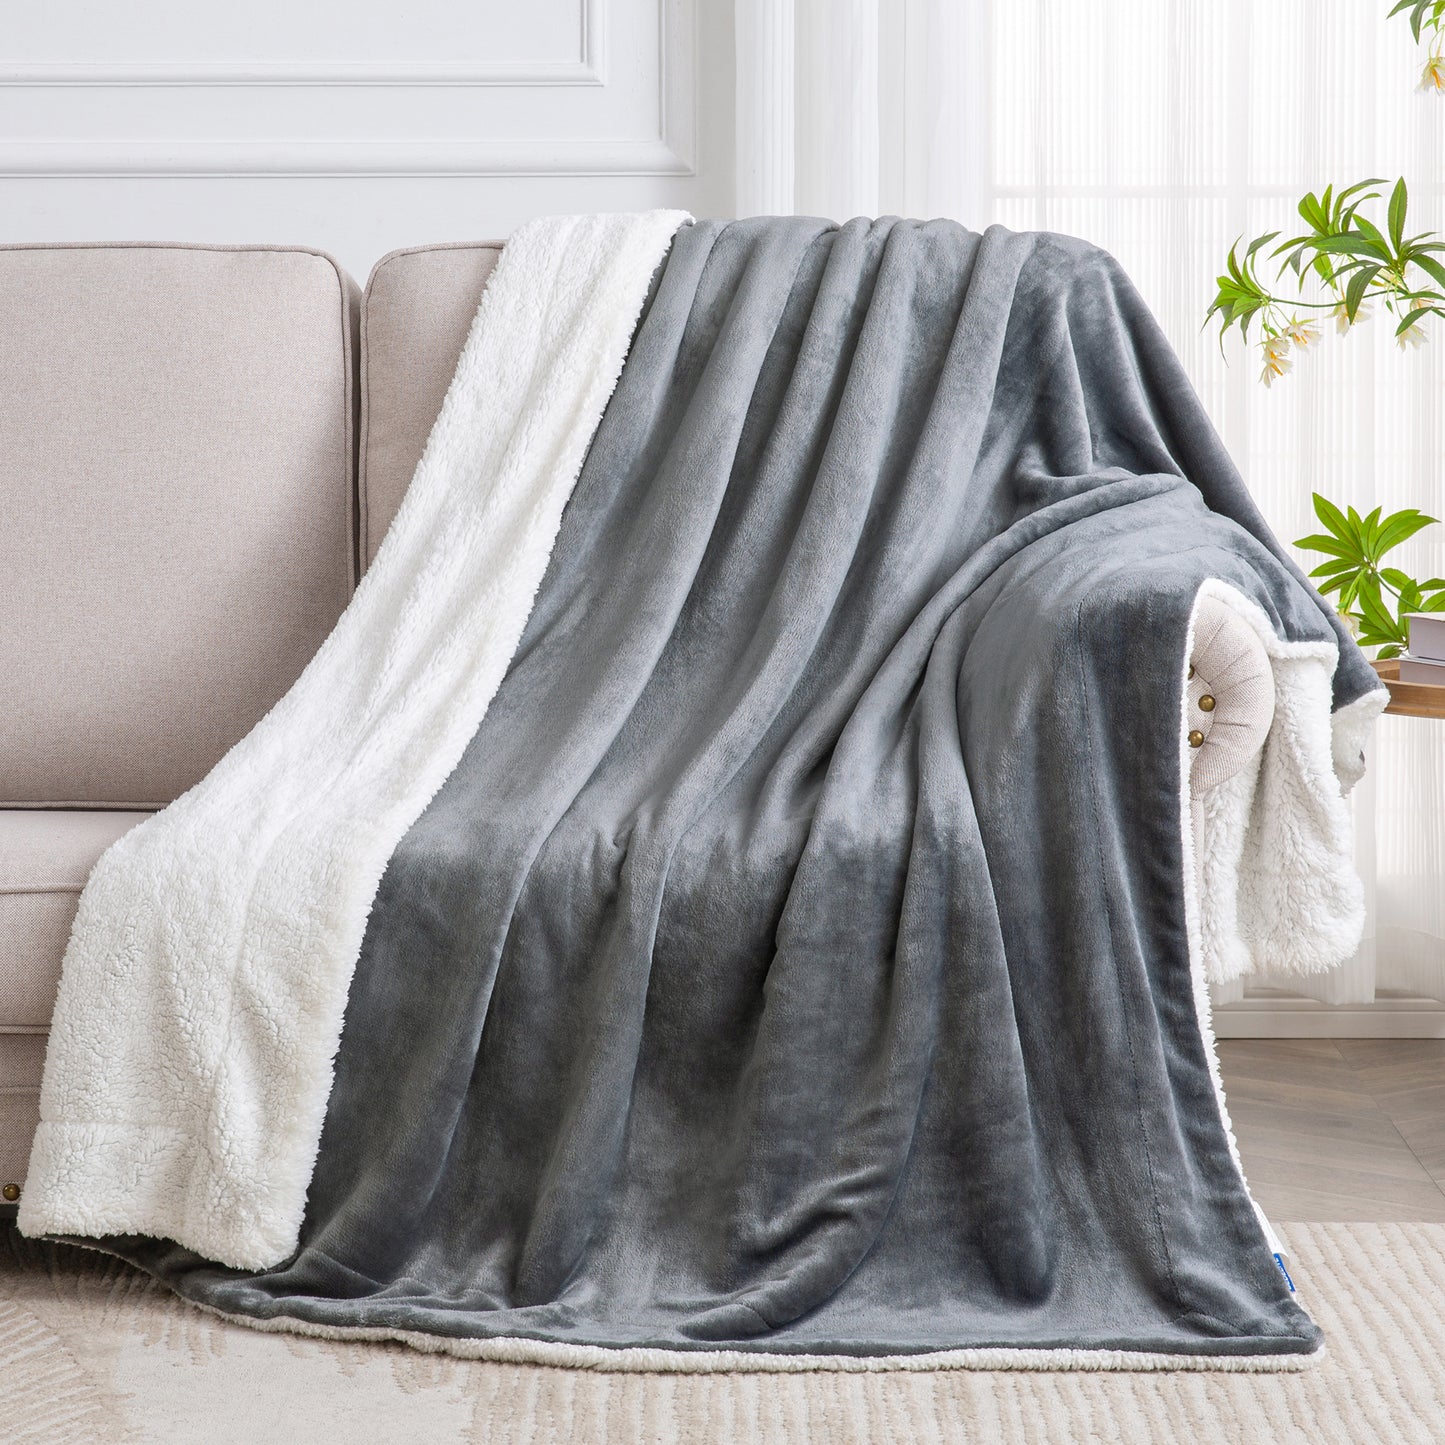 Sherpa Fleece Blanket Throw Blanket for Couch & Bed- 480GSM Thick Warm Winter Blankets, Super Soft & Cozy Fuzzy Blanket